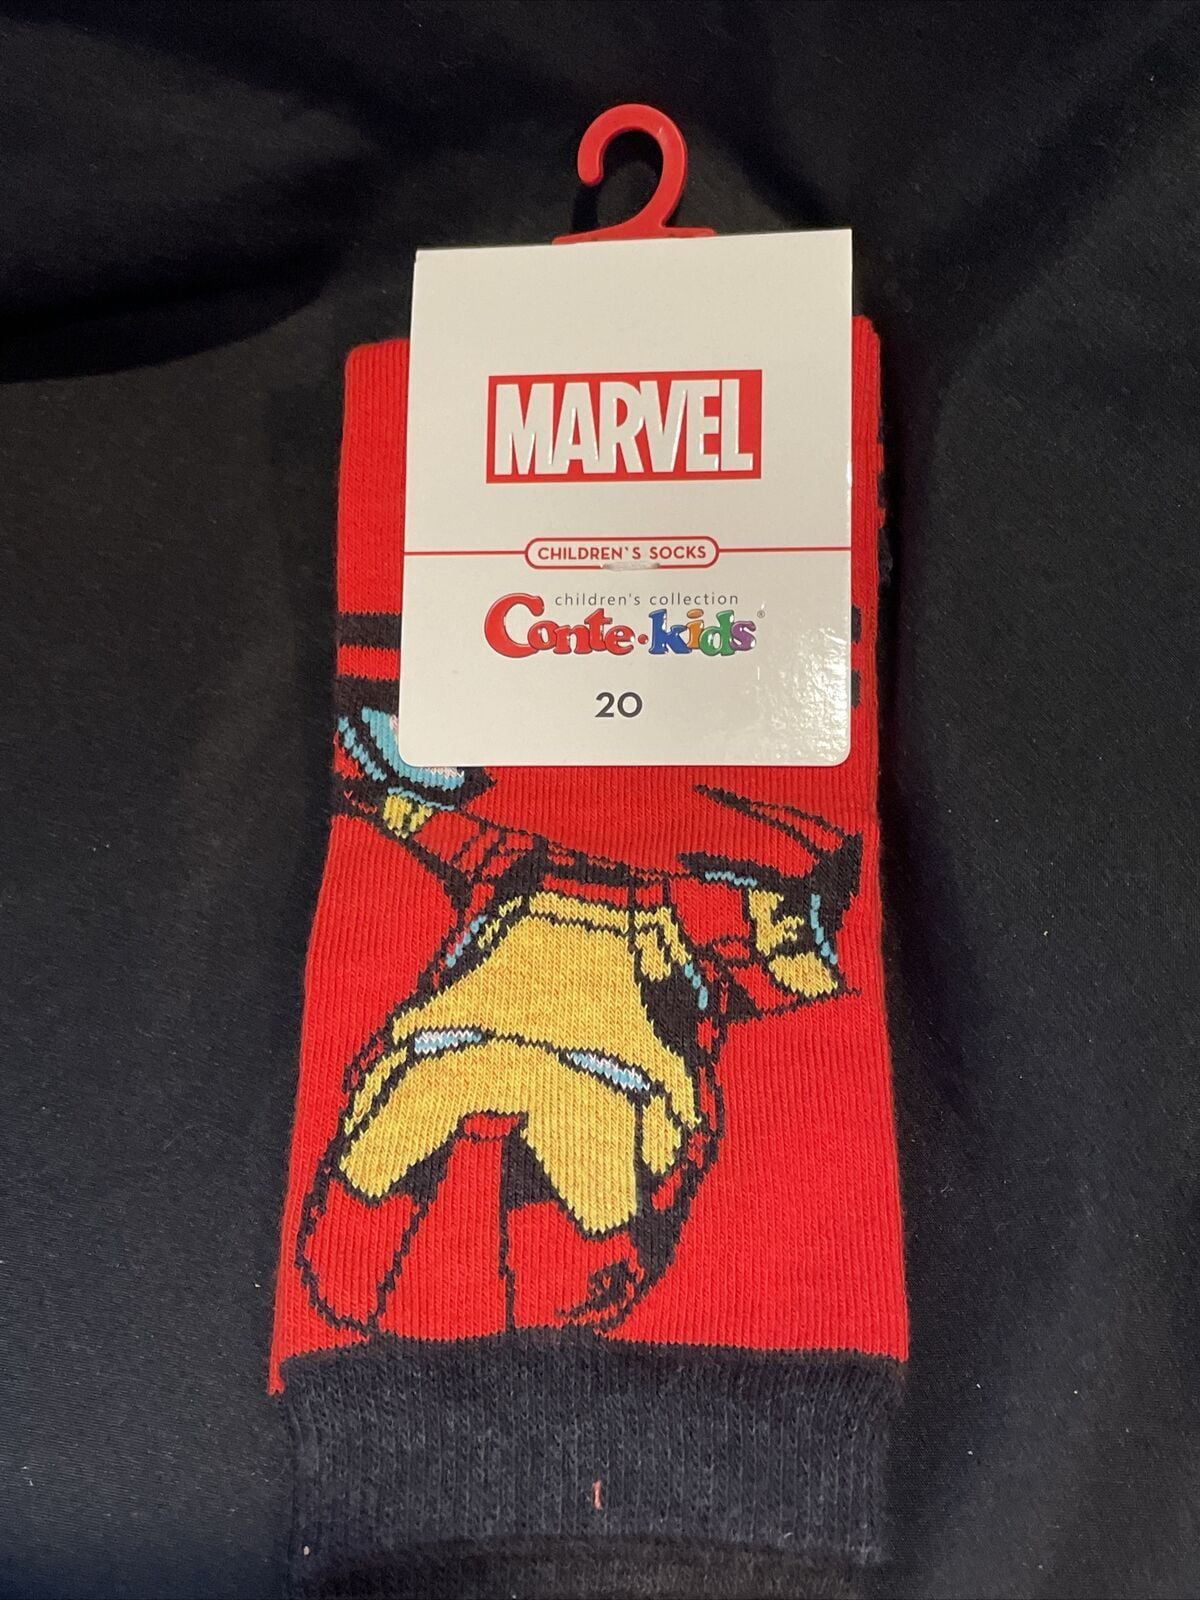 Iron Man Kids Socks fits shoes size 13-2 by Conte Kids 